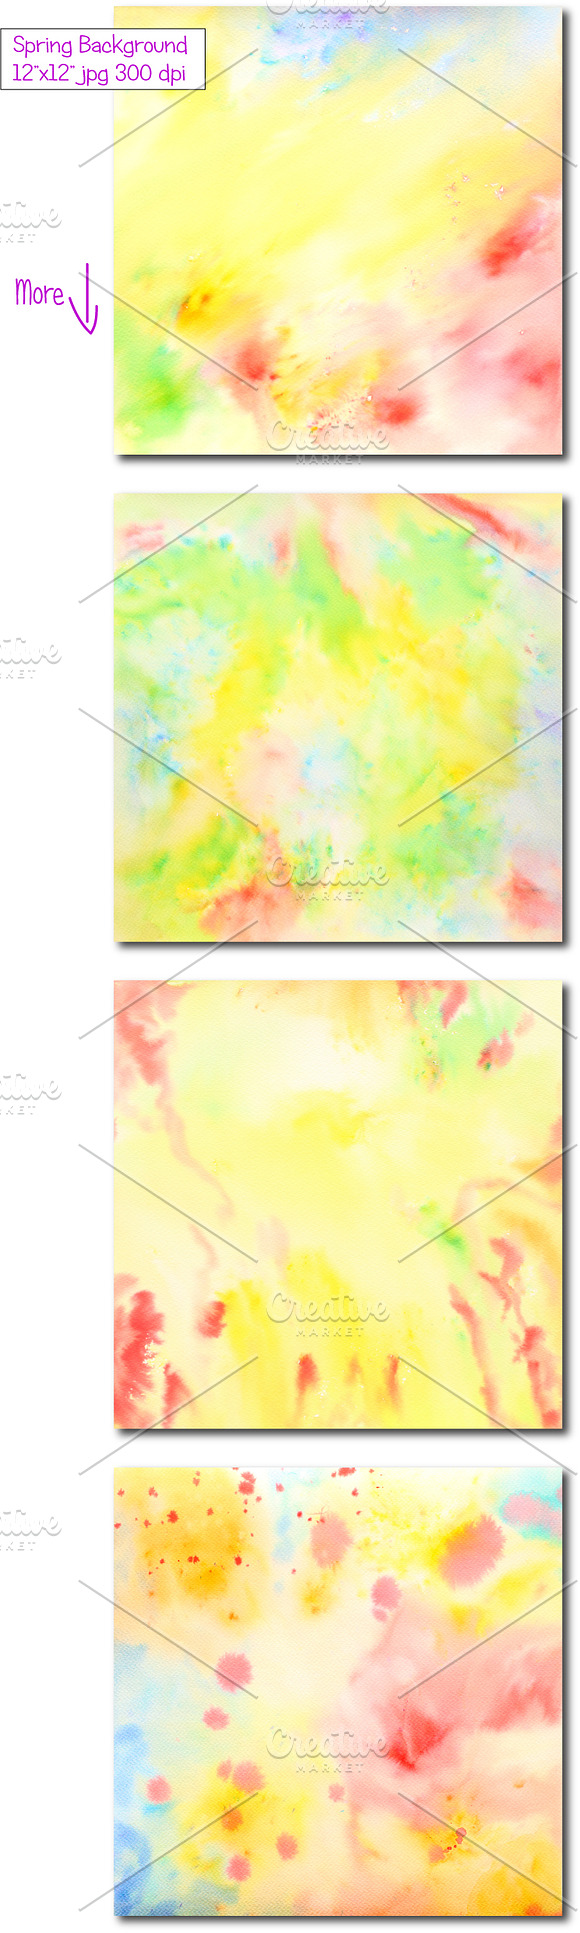 Abstract Spring Background in Patterns - product preview 1